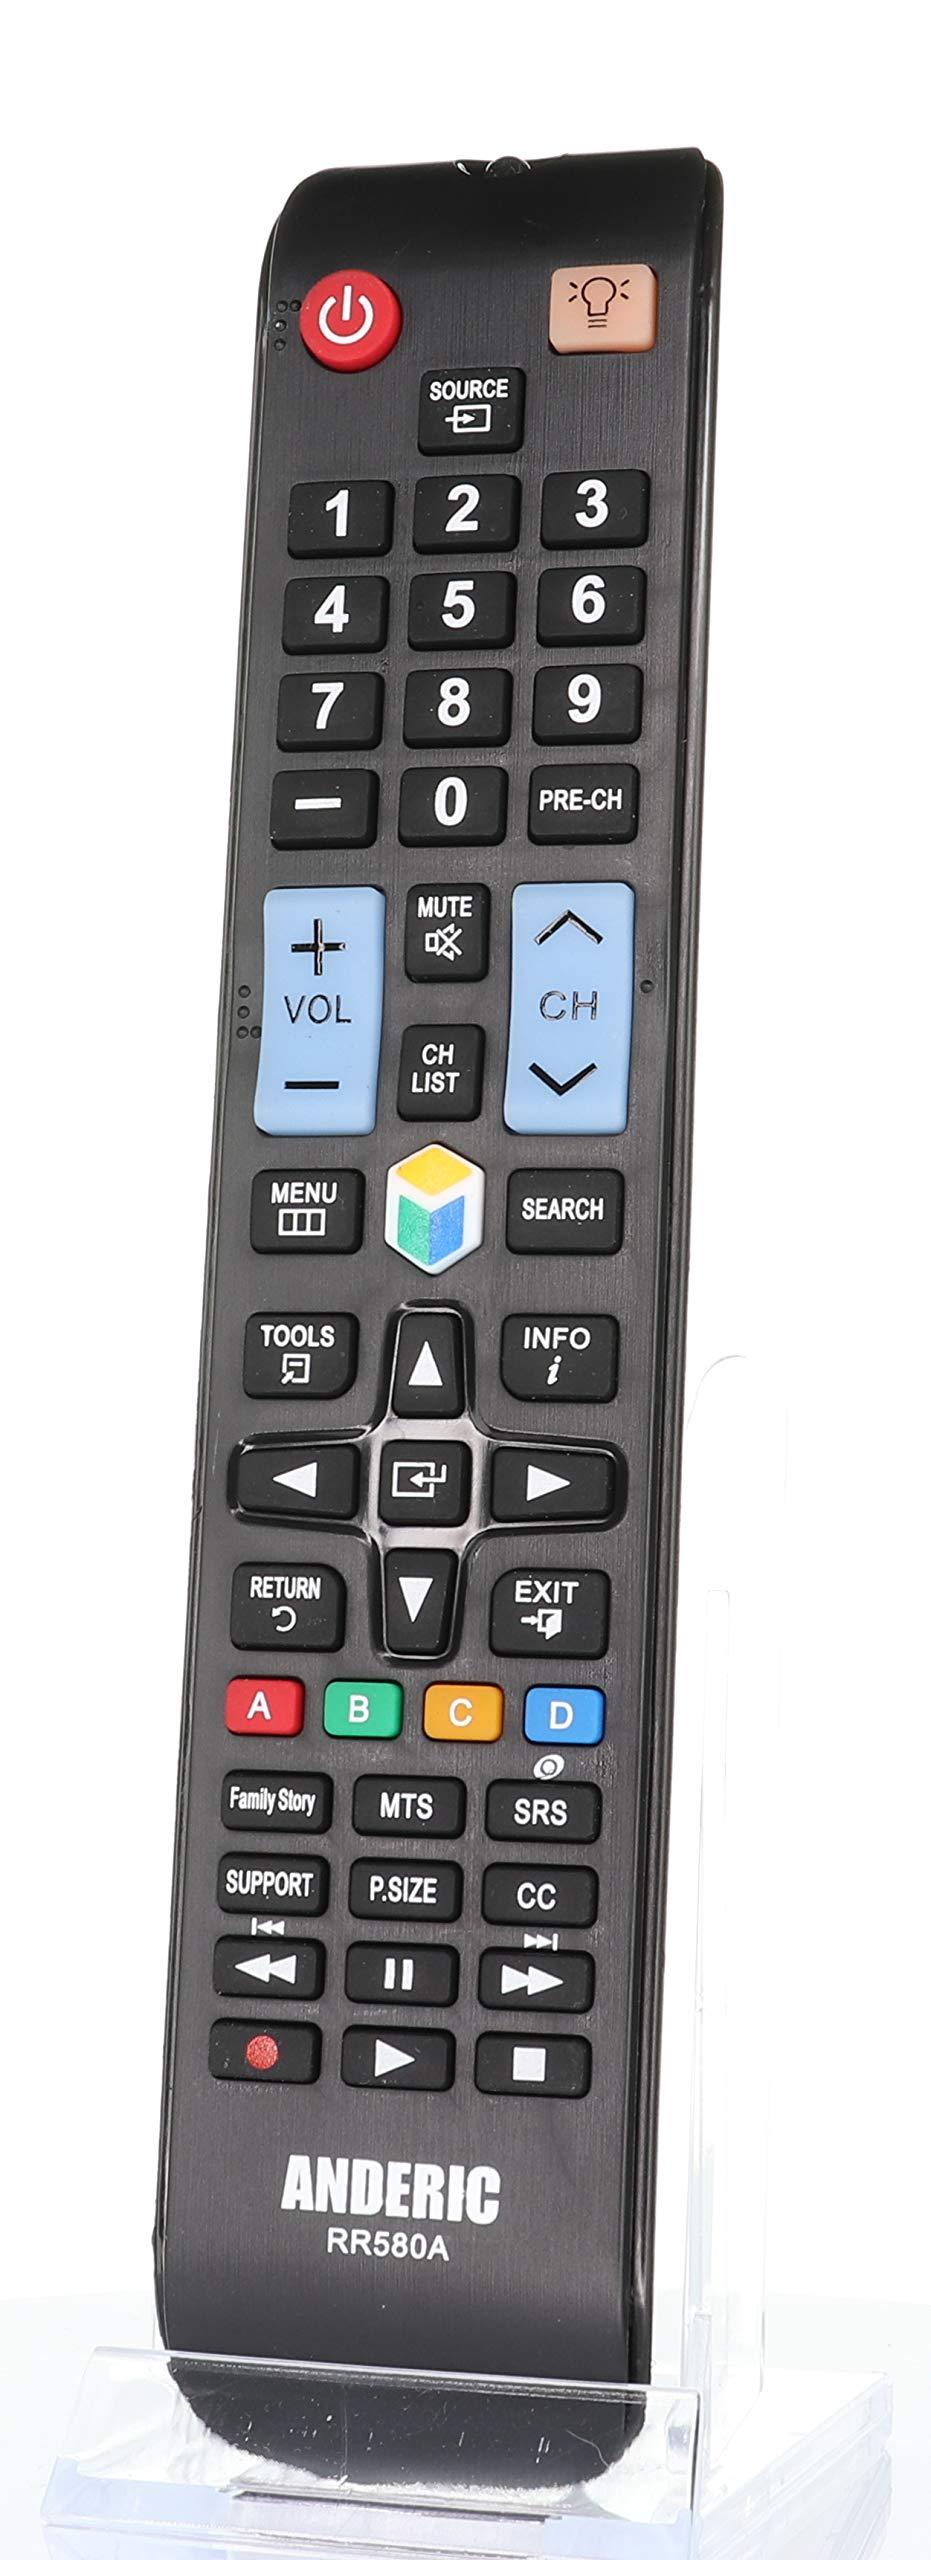 Universal Remote Control for All Samsung LCD LED HDTV 3D Smart TVs - No Programming Needed - RR580A